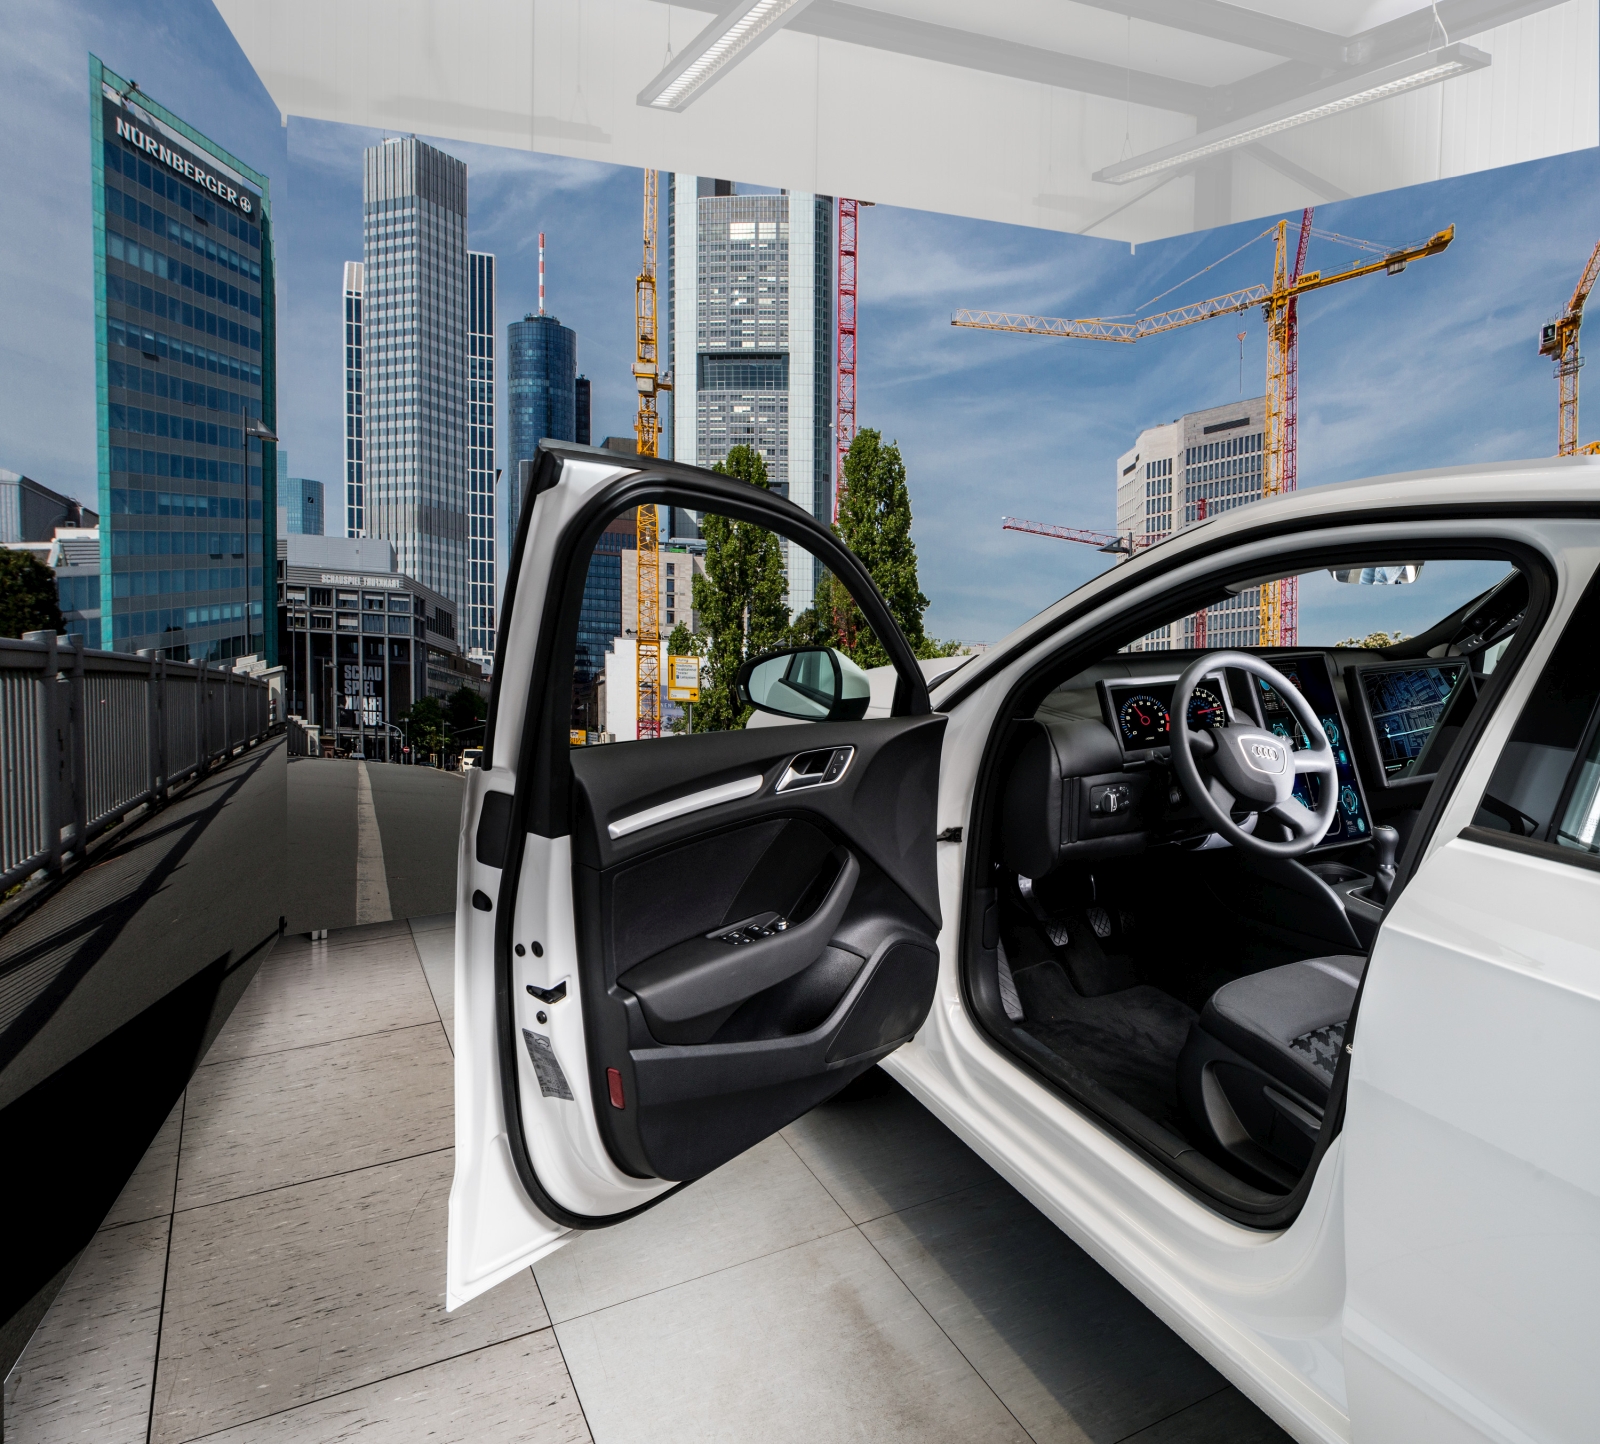 Fraunhofer IOSB has a driving simulator equipped with extensive sensors in the vehicle interior, which was designed specifically for conducting studies and collecting data.